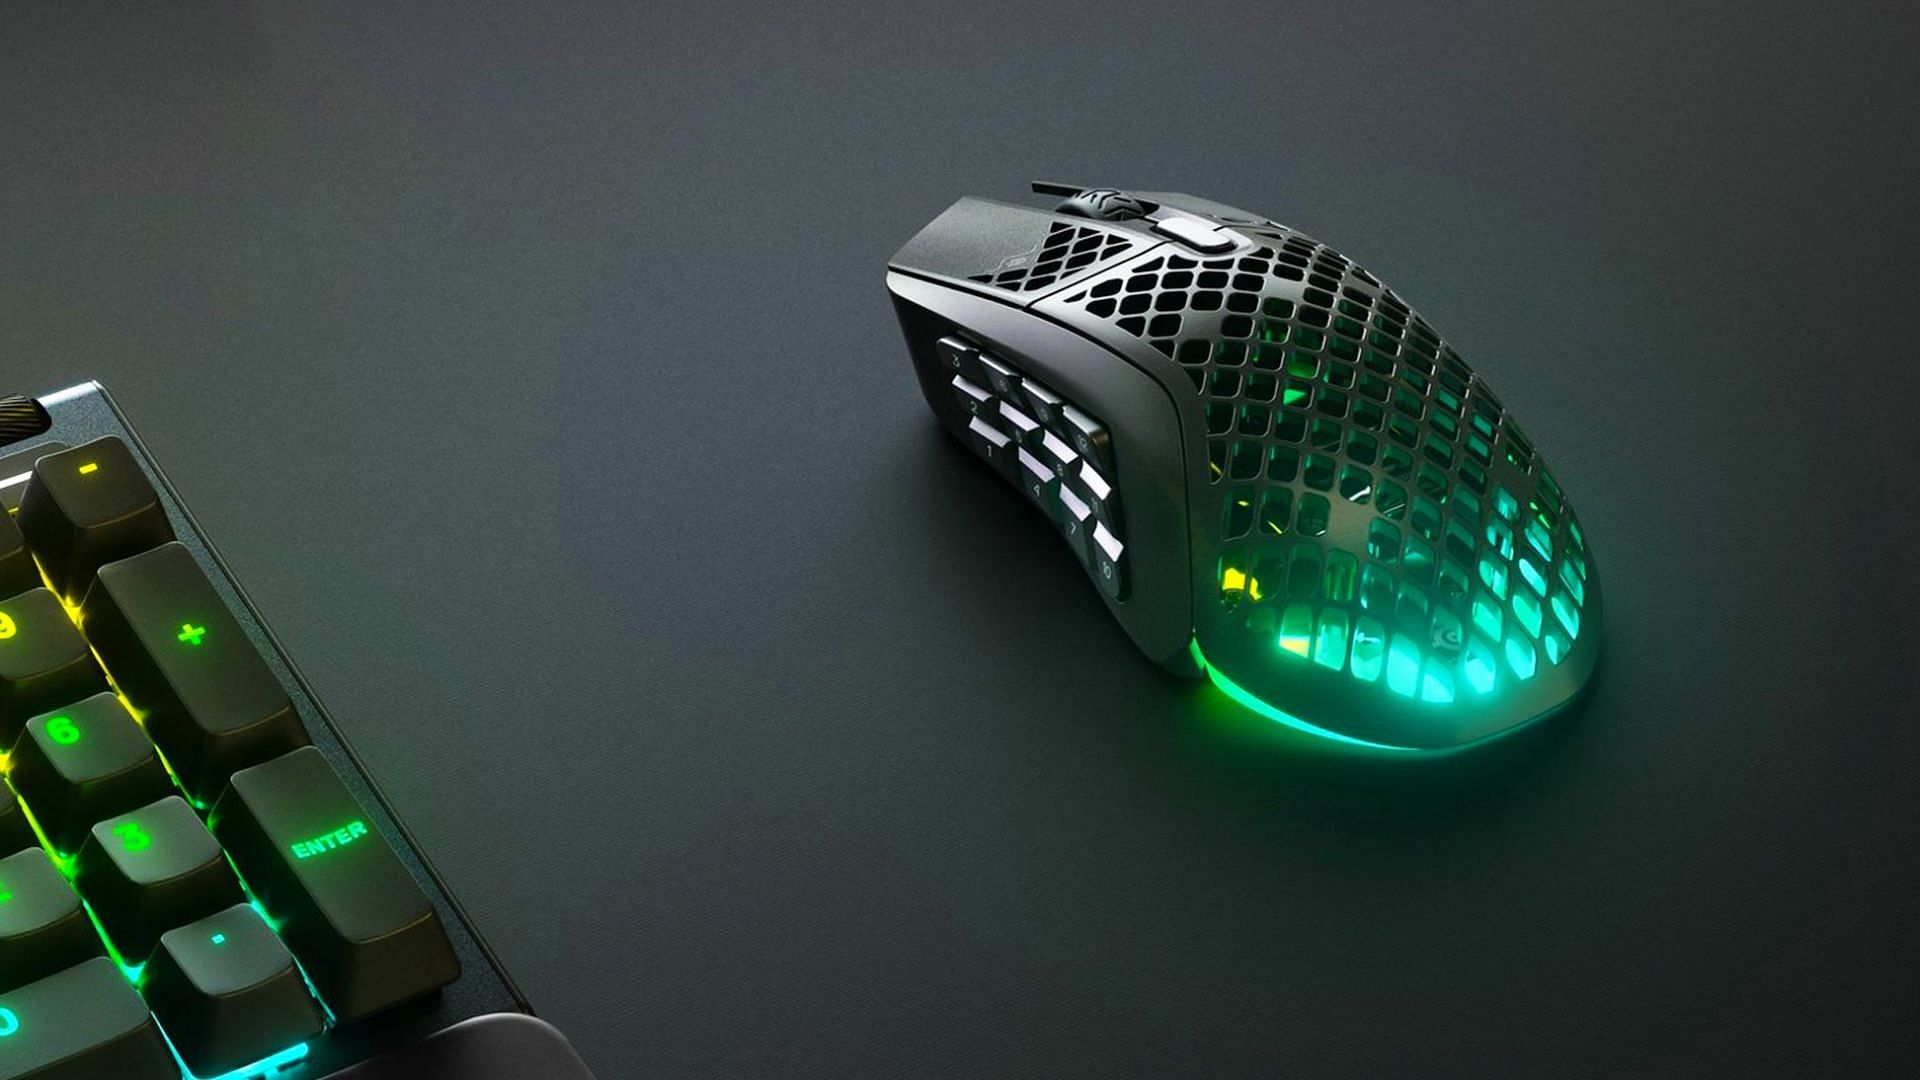 Best gaming mouse for MMORPG games (Image via SteelSeries)